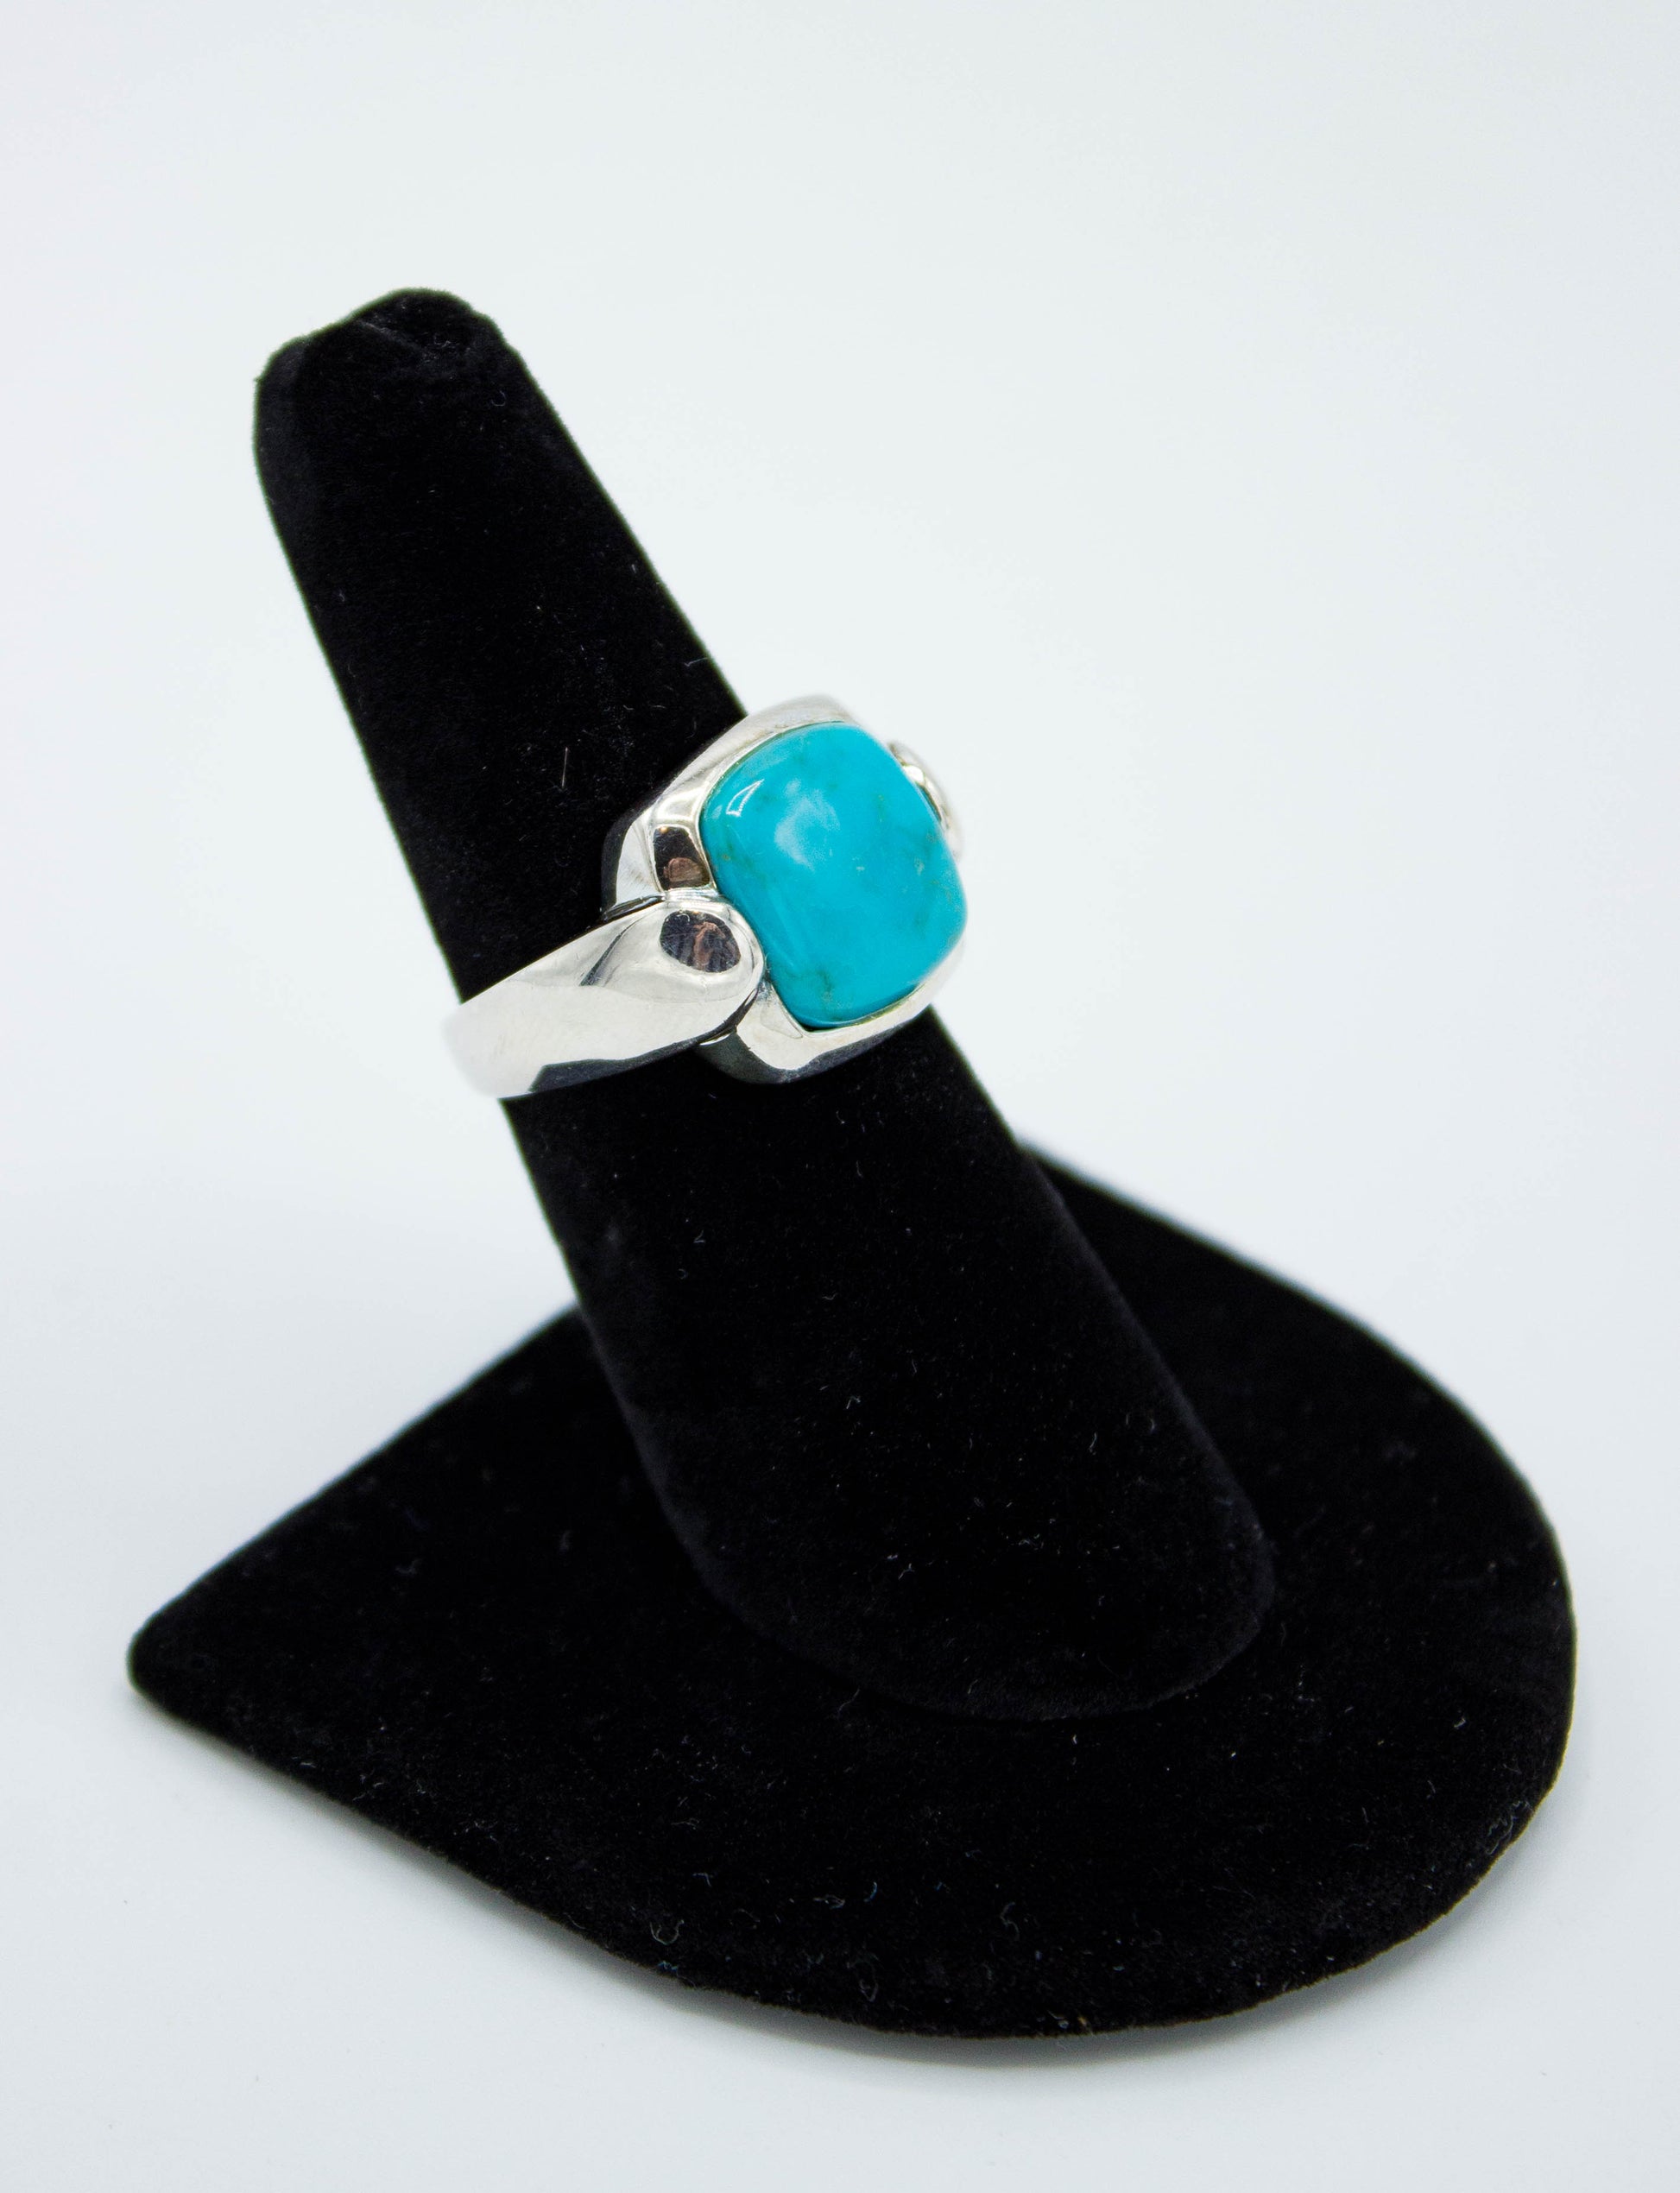 Vintage Sterling Silver and Turquoise Small Square Ring Size 6 3/4